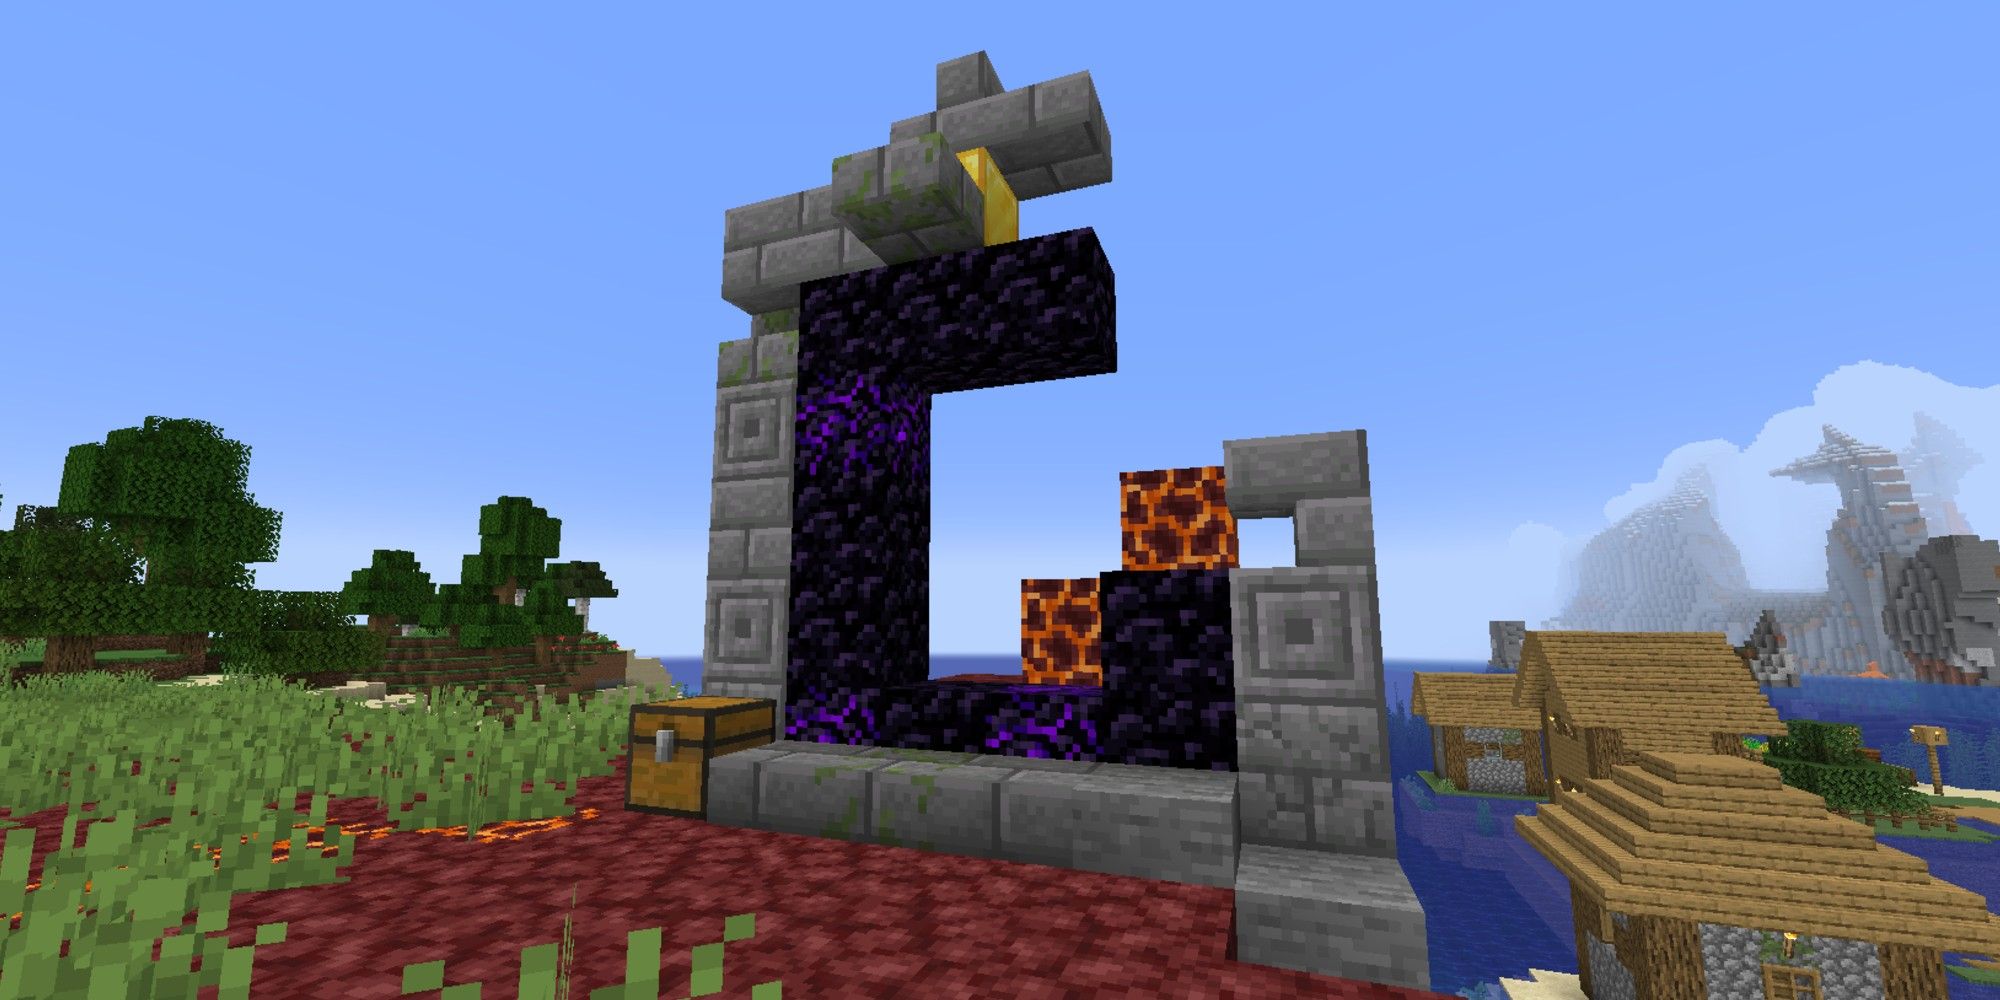 nether portal that is falling apart next to village